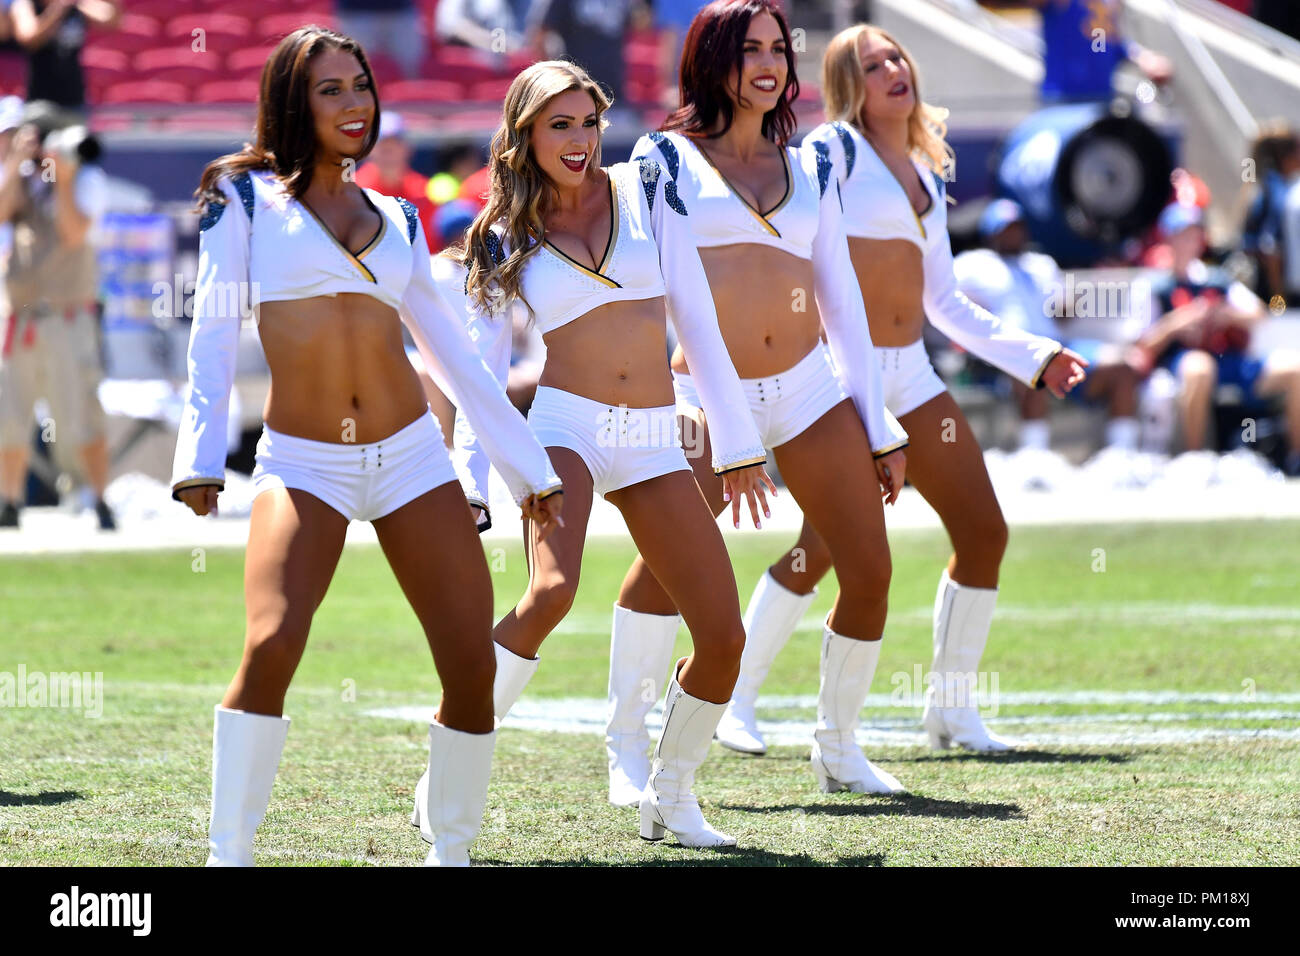 Los Angeles, CA, USA. 16th Sep, 2018. Los Angeles Rams Cheerleaders perform during the NFL football game against the Arizona Cardinals at the Los Angeles Memorial Coliseum in Los Angeles, California.Mandatory Photo Credit: Louis Lopez/CSM/Alamy Live News Stock Photo